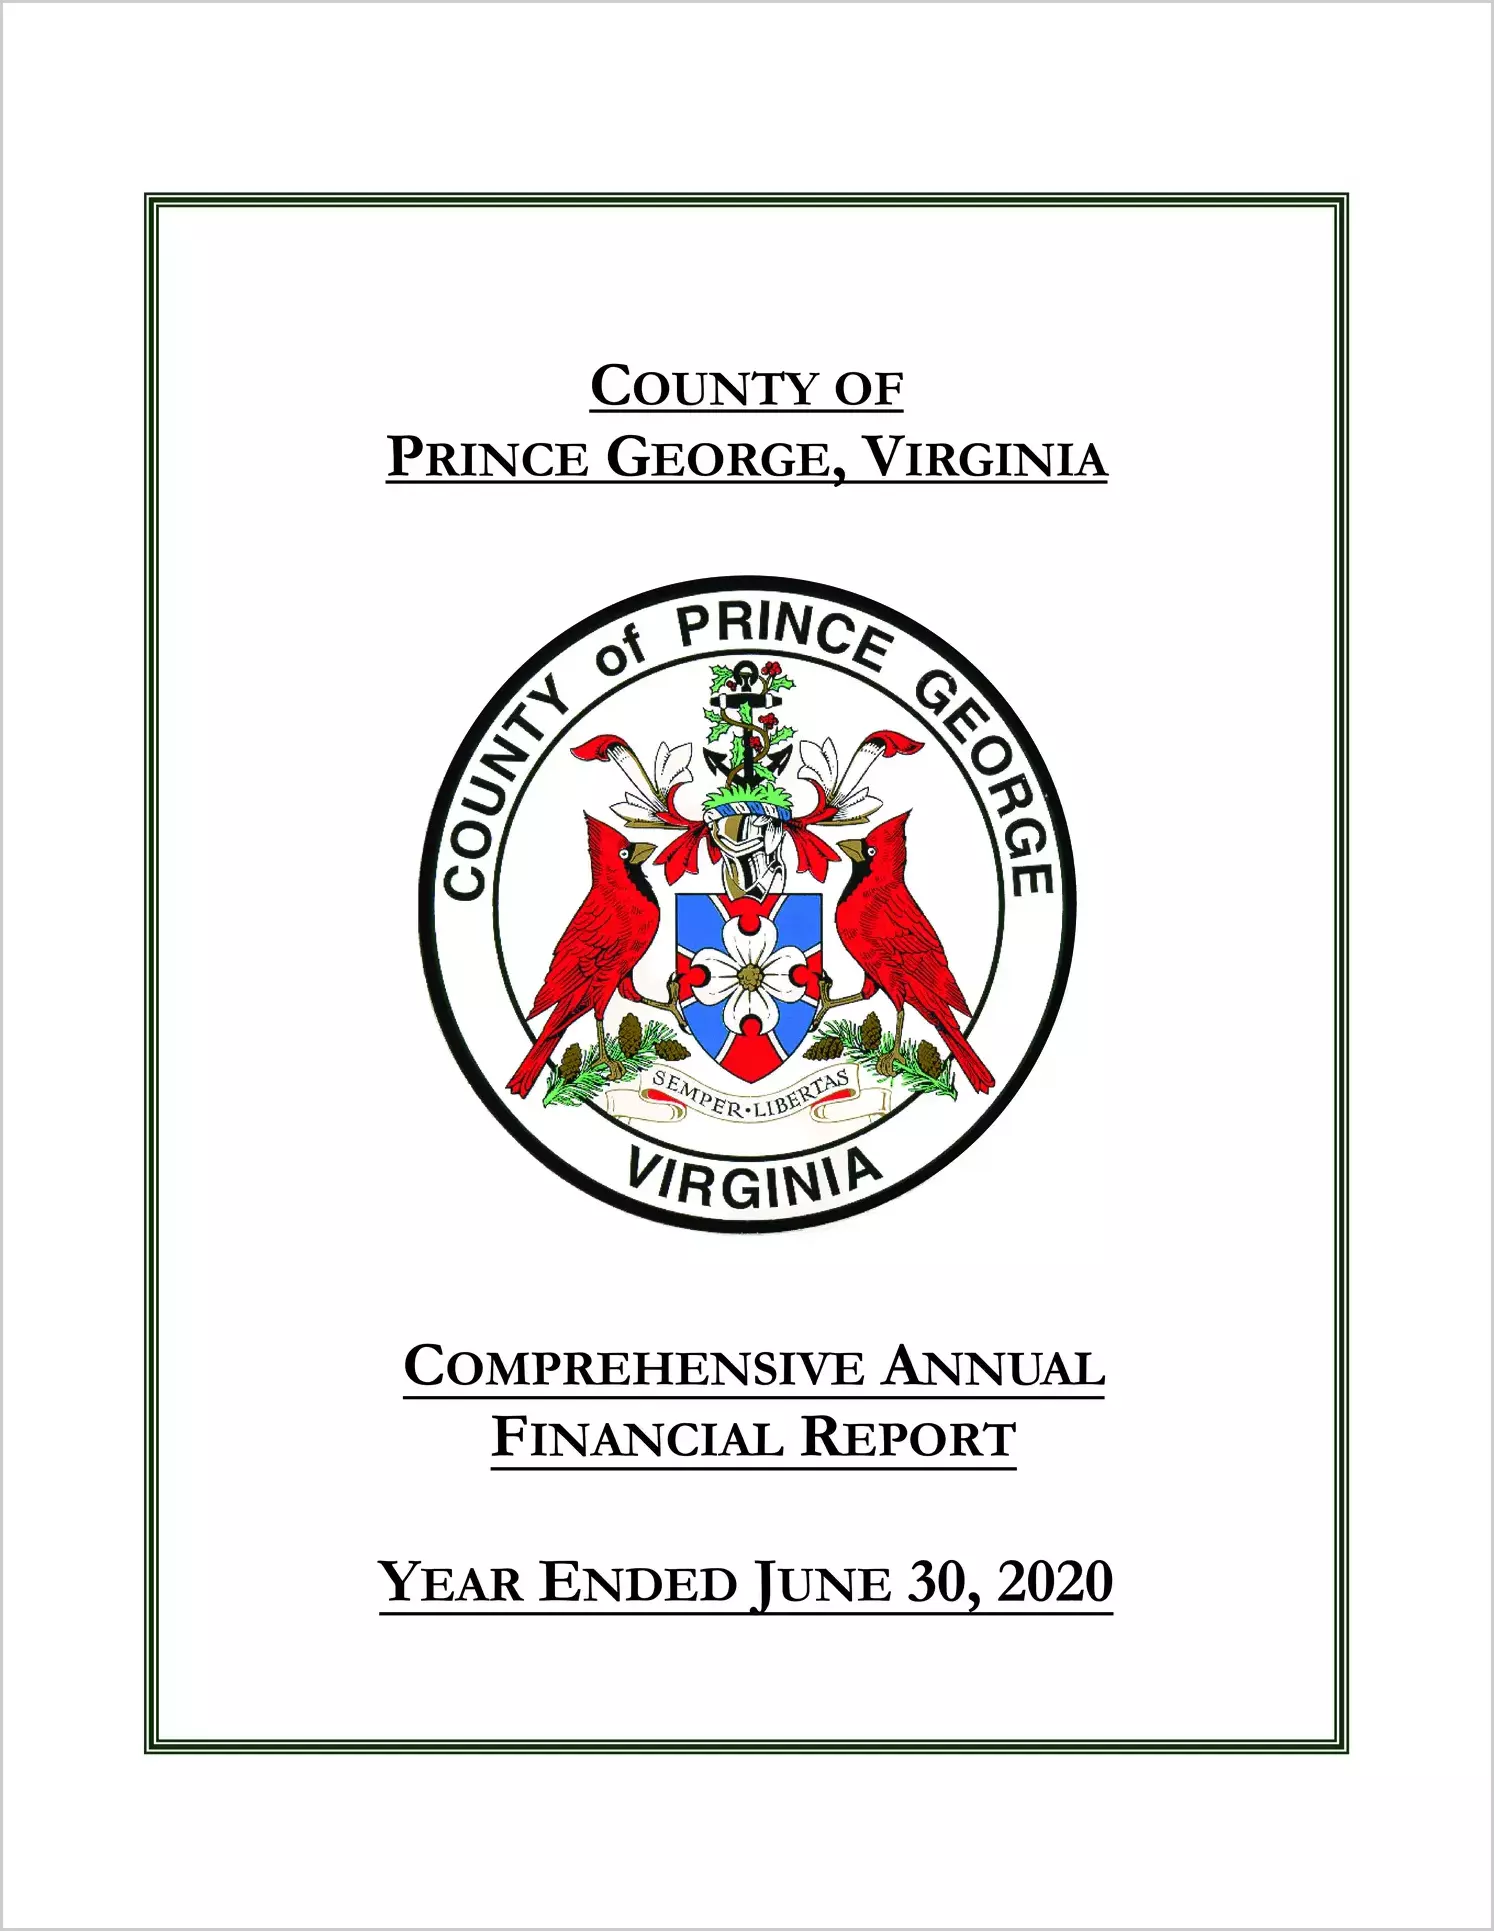 2020 Annual Financial Report for County of Prince George